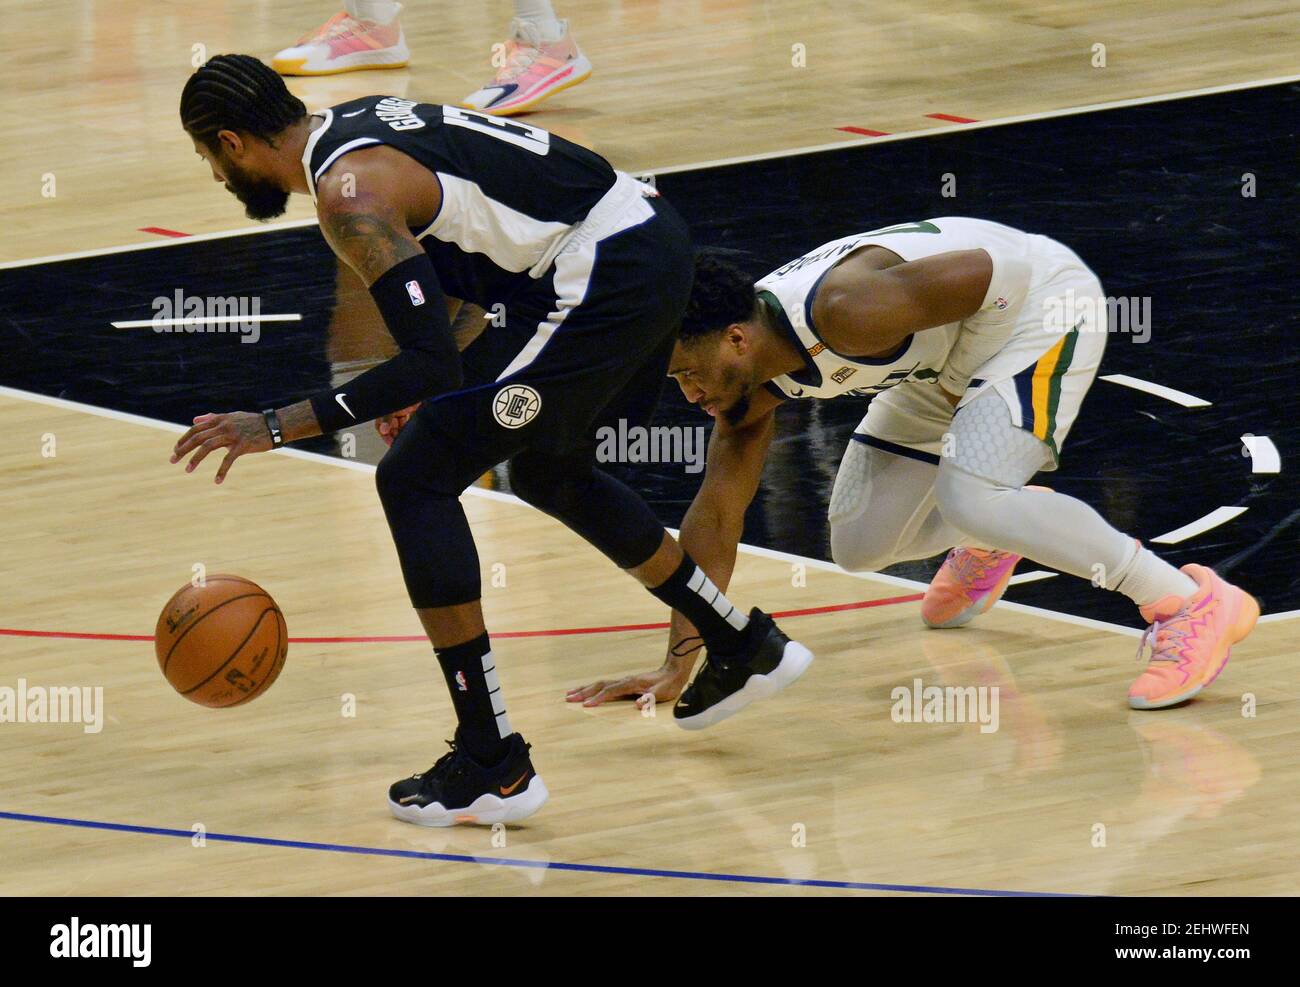 Los Angeles Clippers' guard Paul George chases the loose ball after the attempted steal by Utah Jazz guard Donovan Mitchell during the first half at Staples Center in Los Angeles on Friday, February 19, 2021. The Clippers defeated the Jazz 116-112.  Photo by Jim Ruymen/UPI Stock Photo